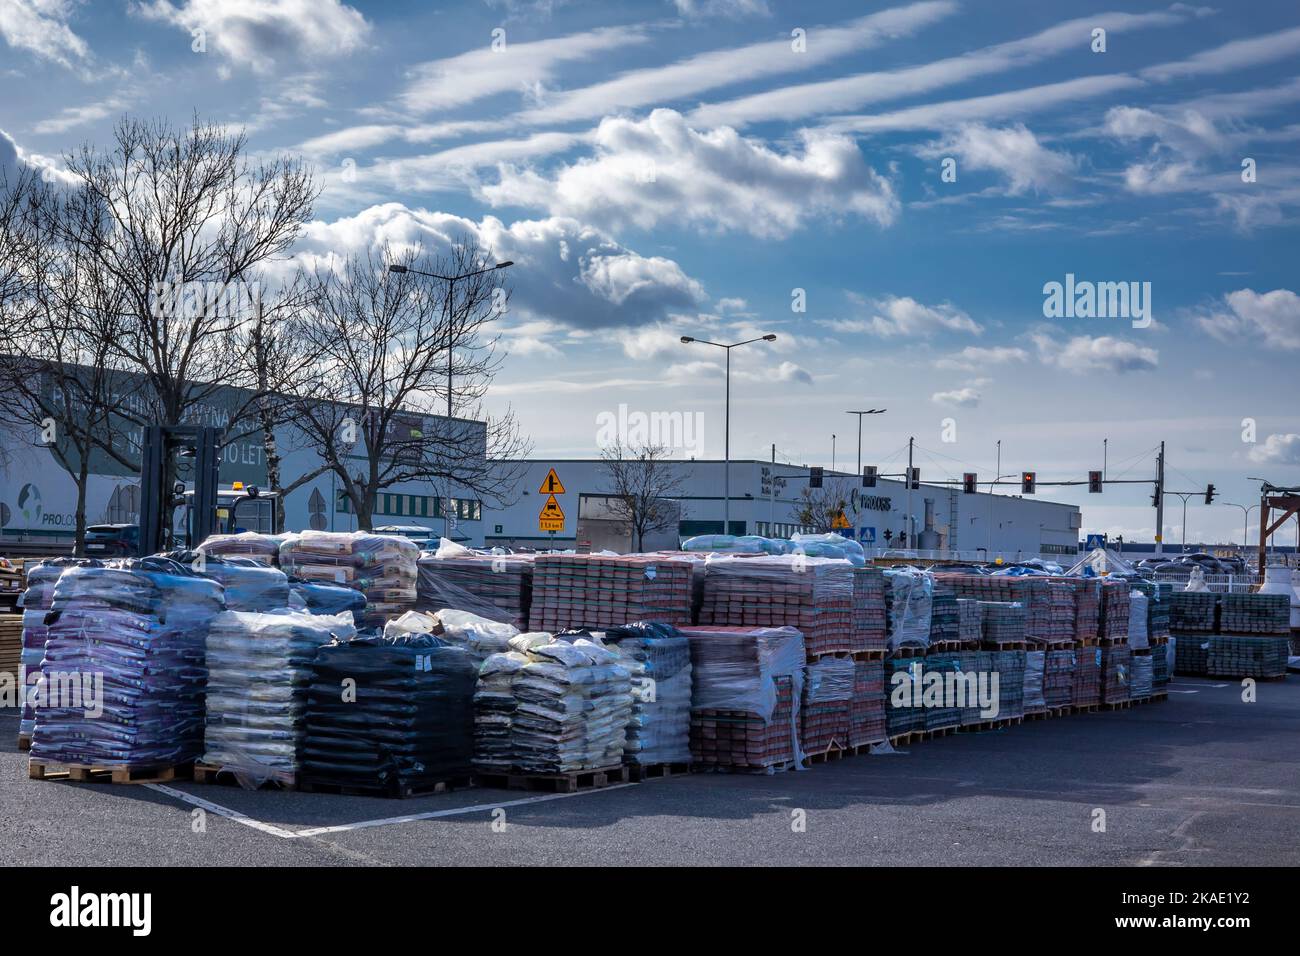 Wroclaw, Poland - February 19, 2022:  Construction materials stacked outdoors. Stock Photo